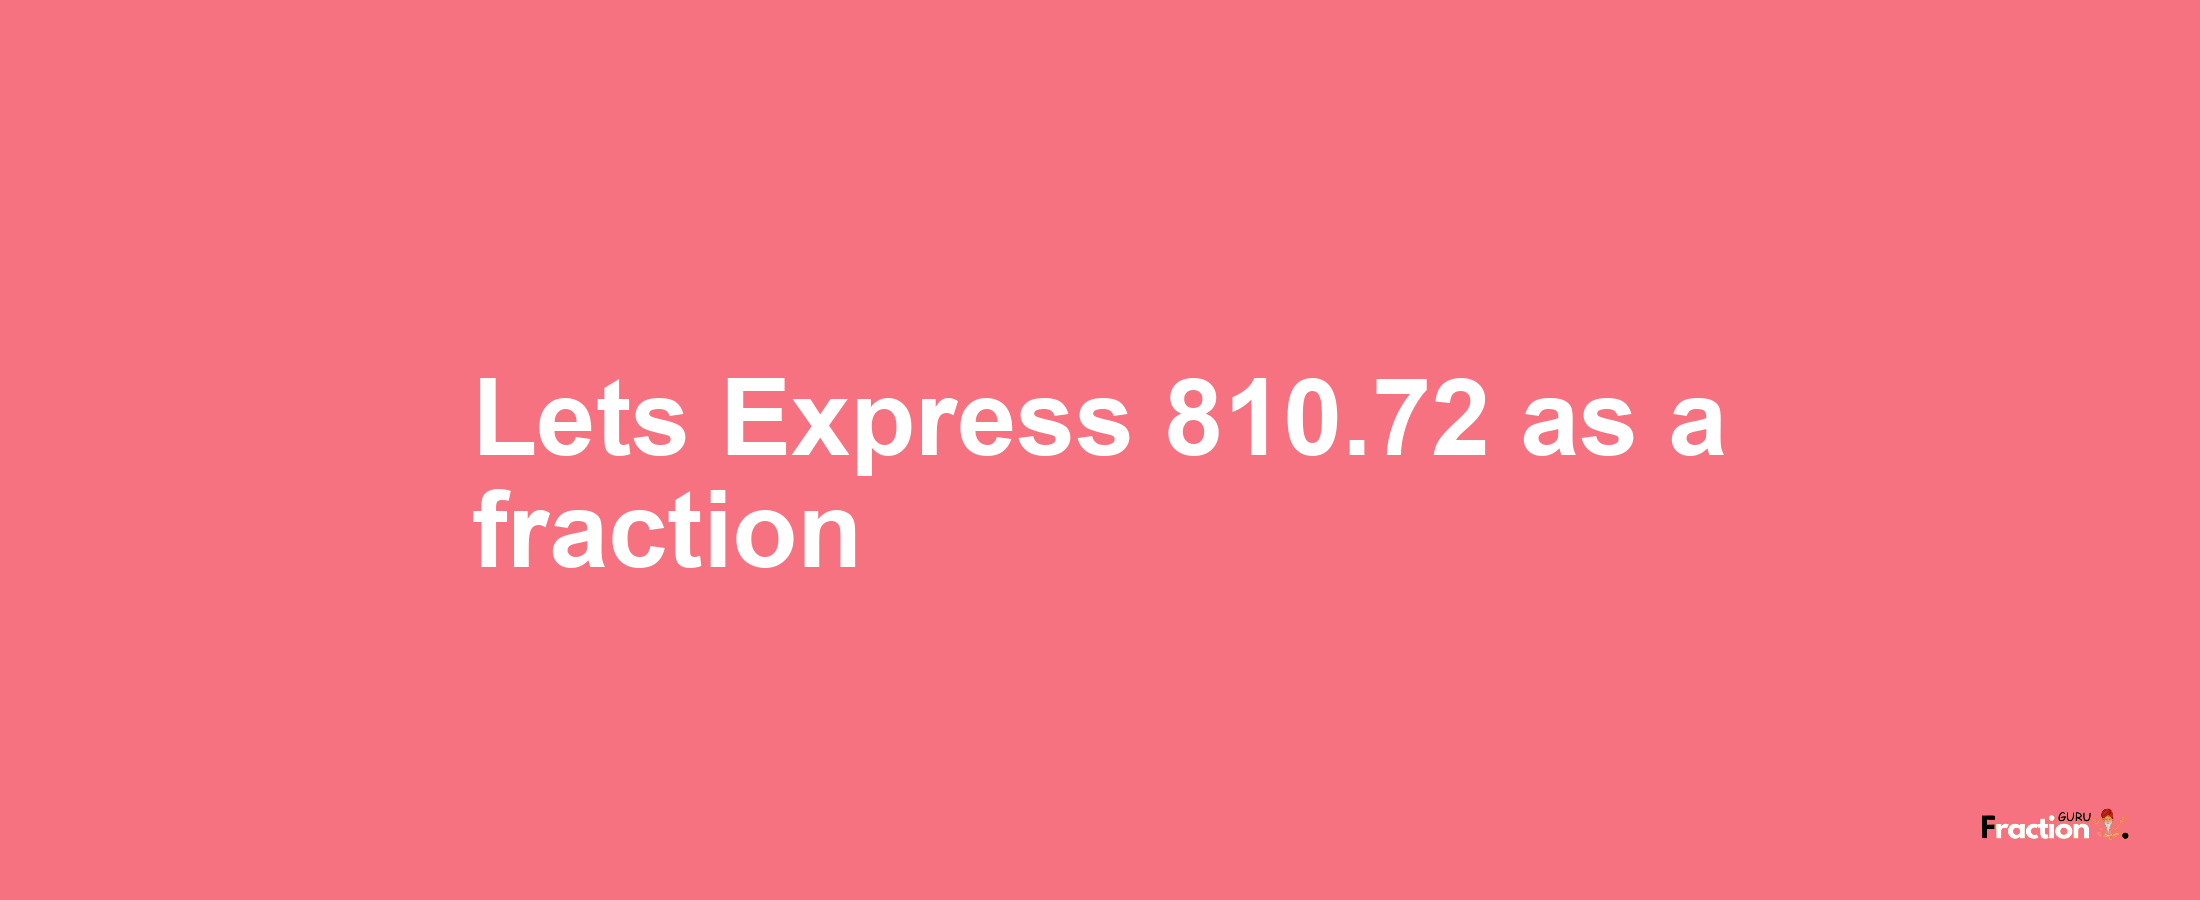 Lets Express 810.72 as afraction